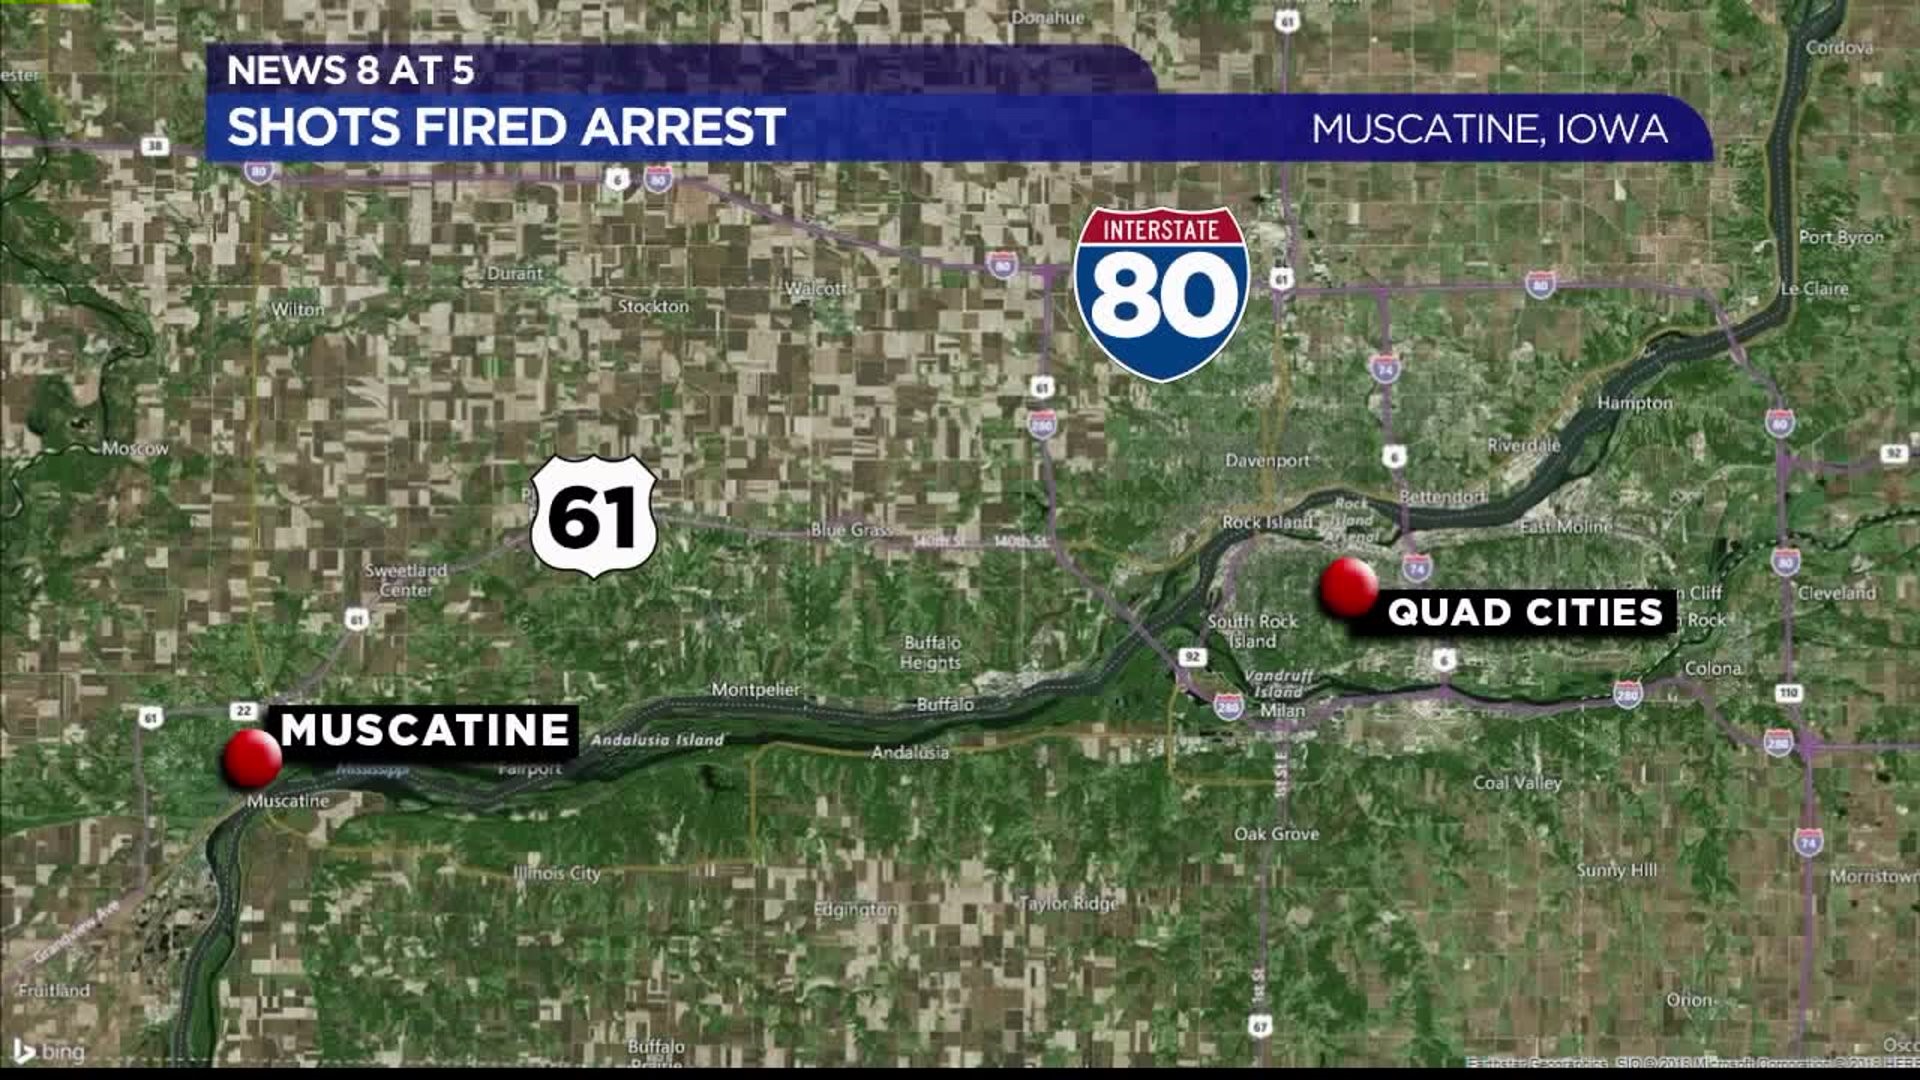 17-year-old arrested in Muscatine after shots fired call